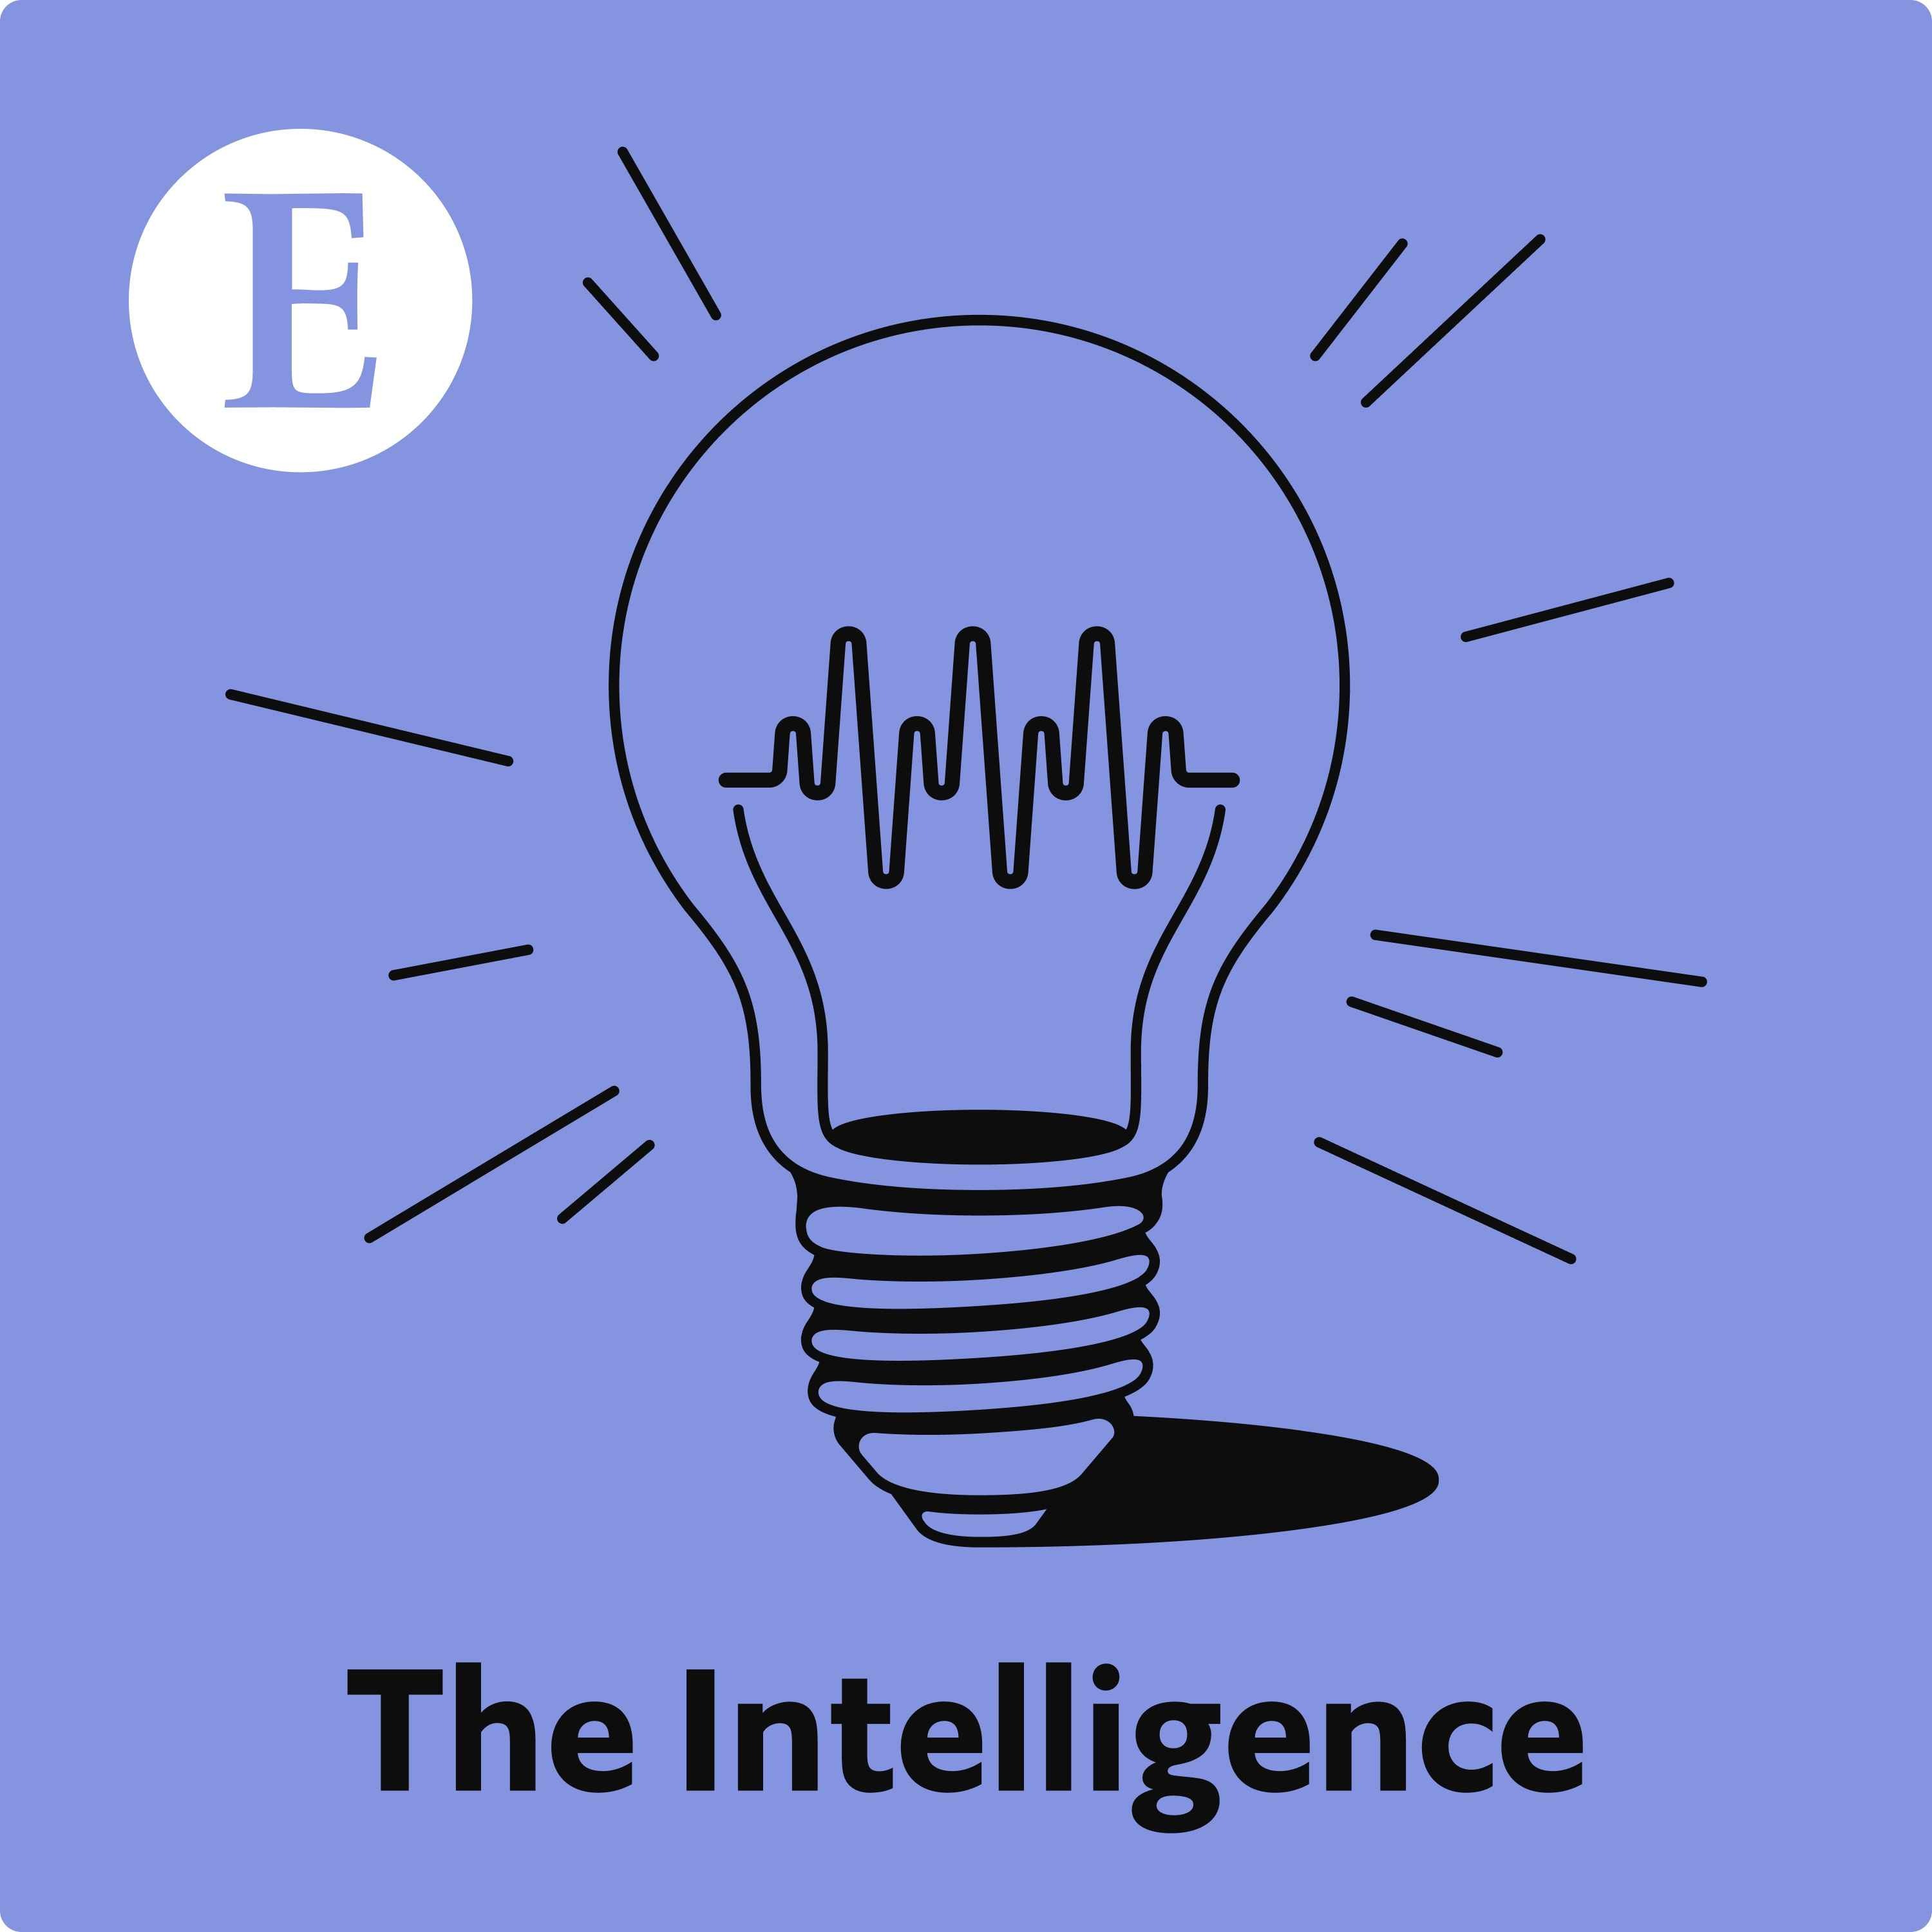 The Intelligence: A former general, elected in Indonesia